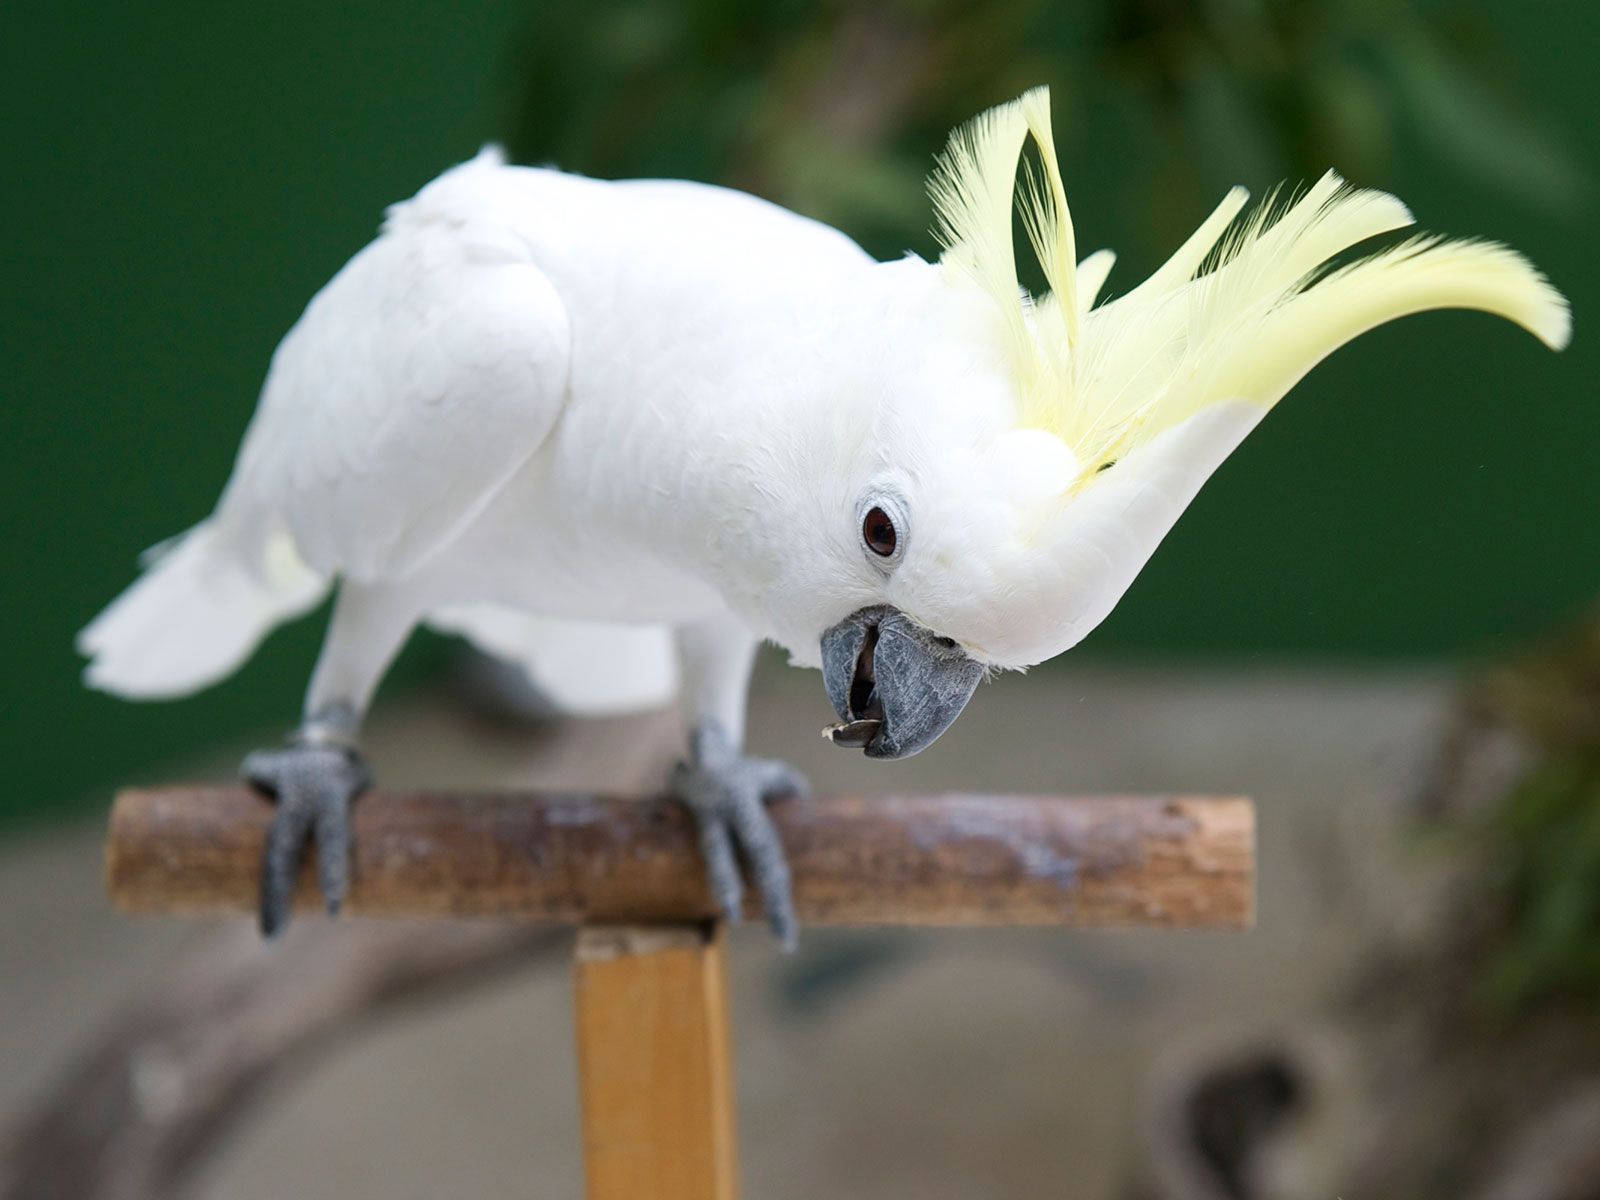 What Can Dancing Cockatoos Teach Us About Ourselves?